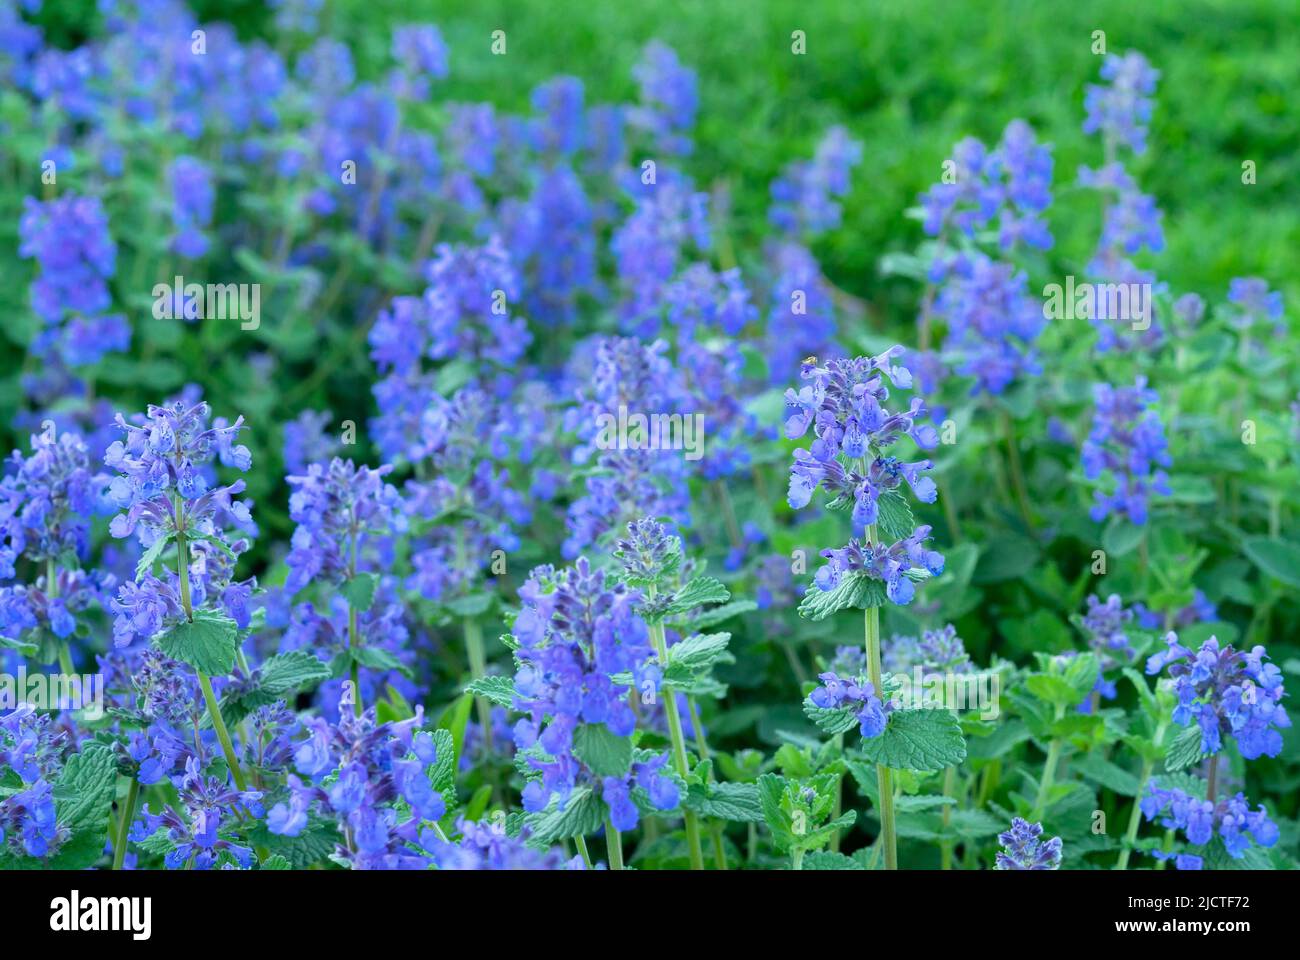 Catnip (Nepeta racemosa) blooms in the summer garden. Blue catmint flowers. Stock Photo